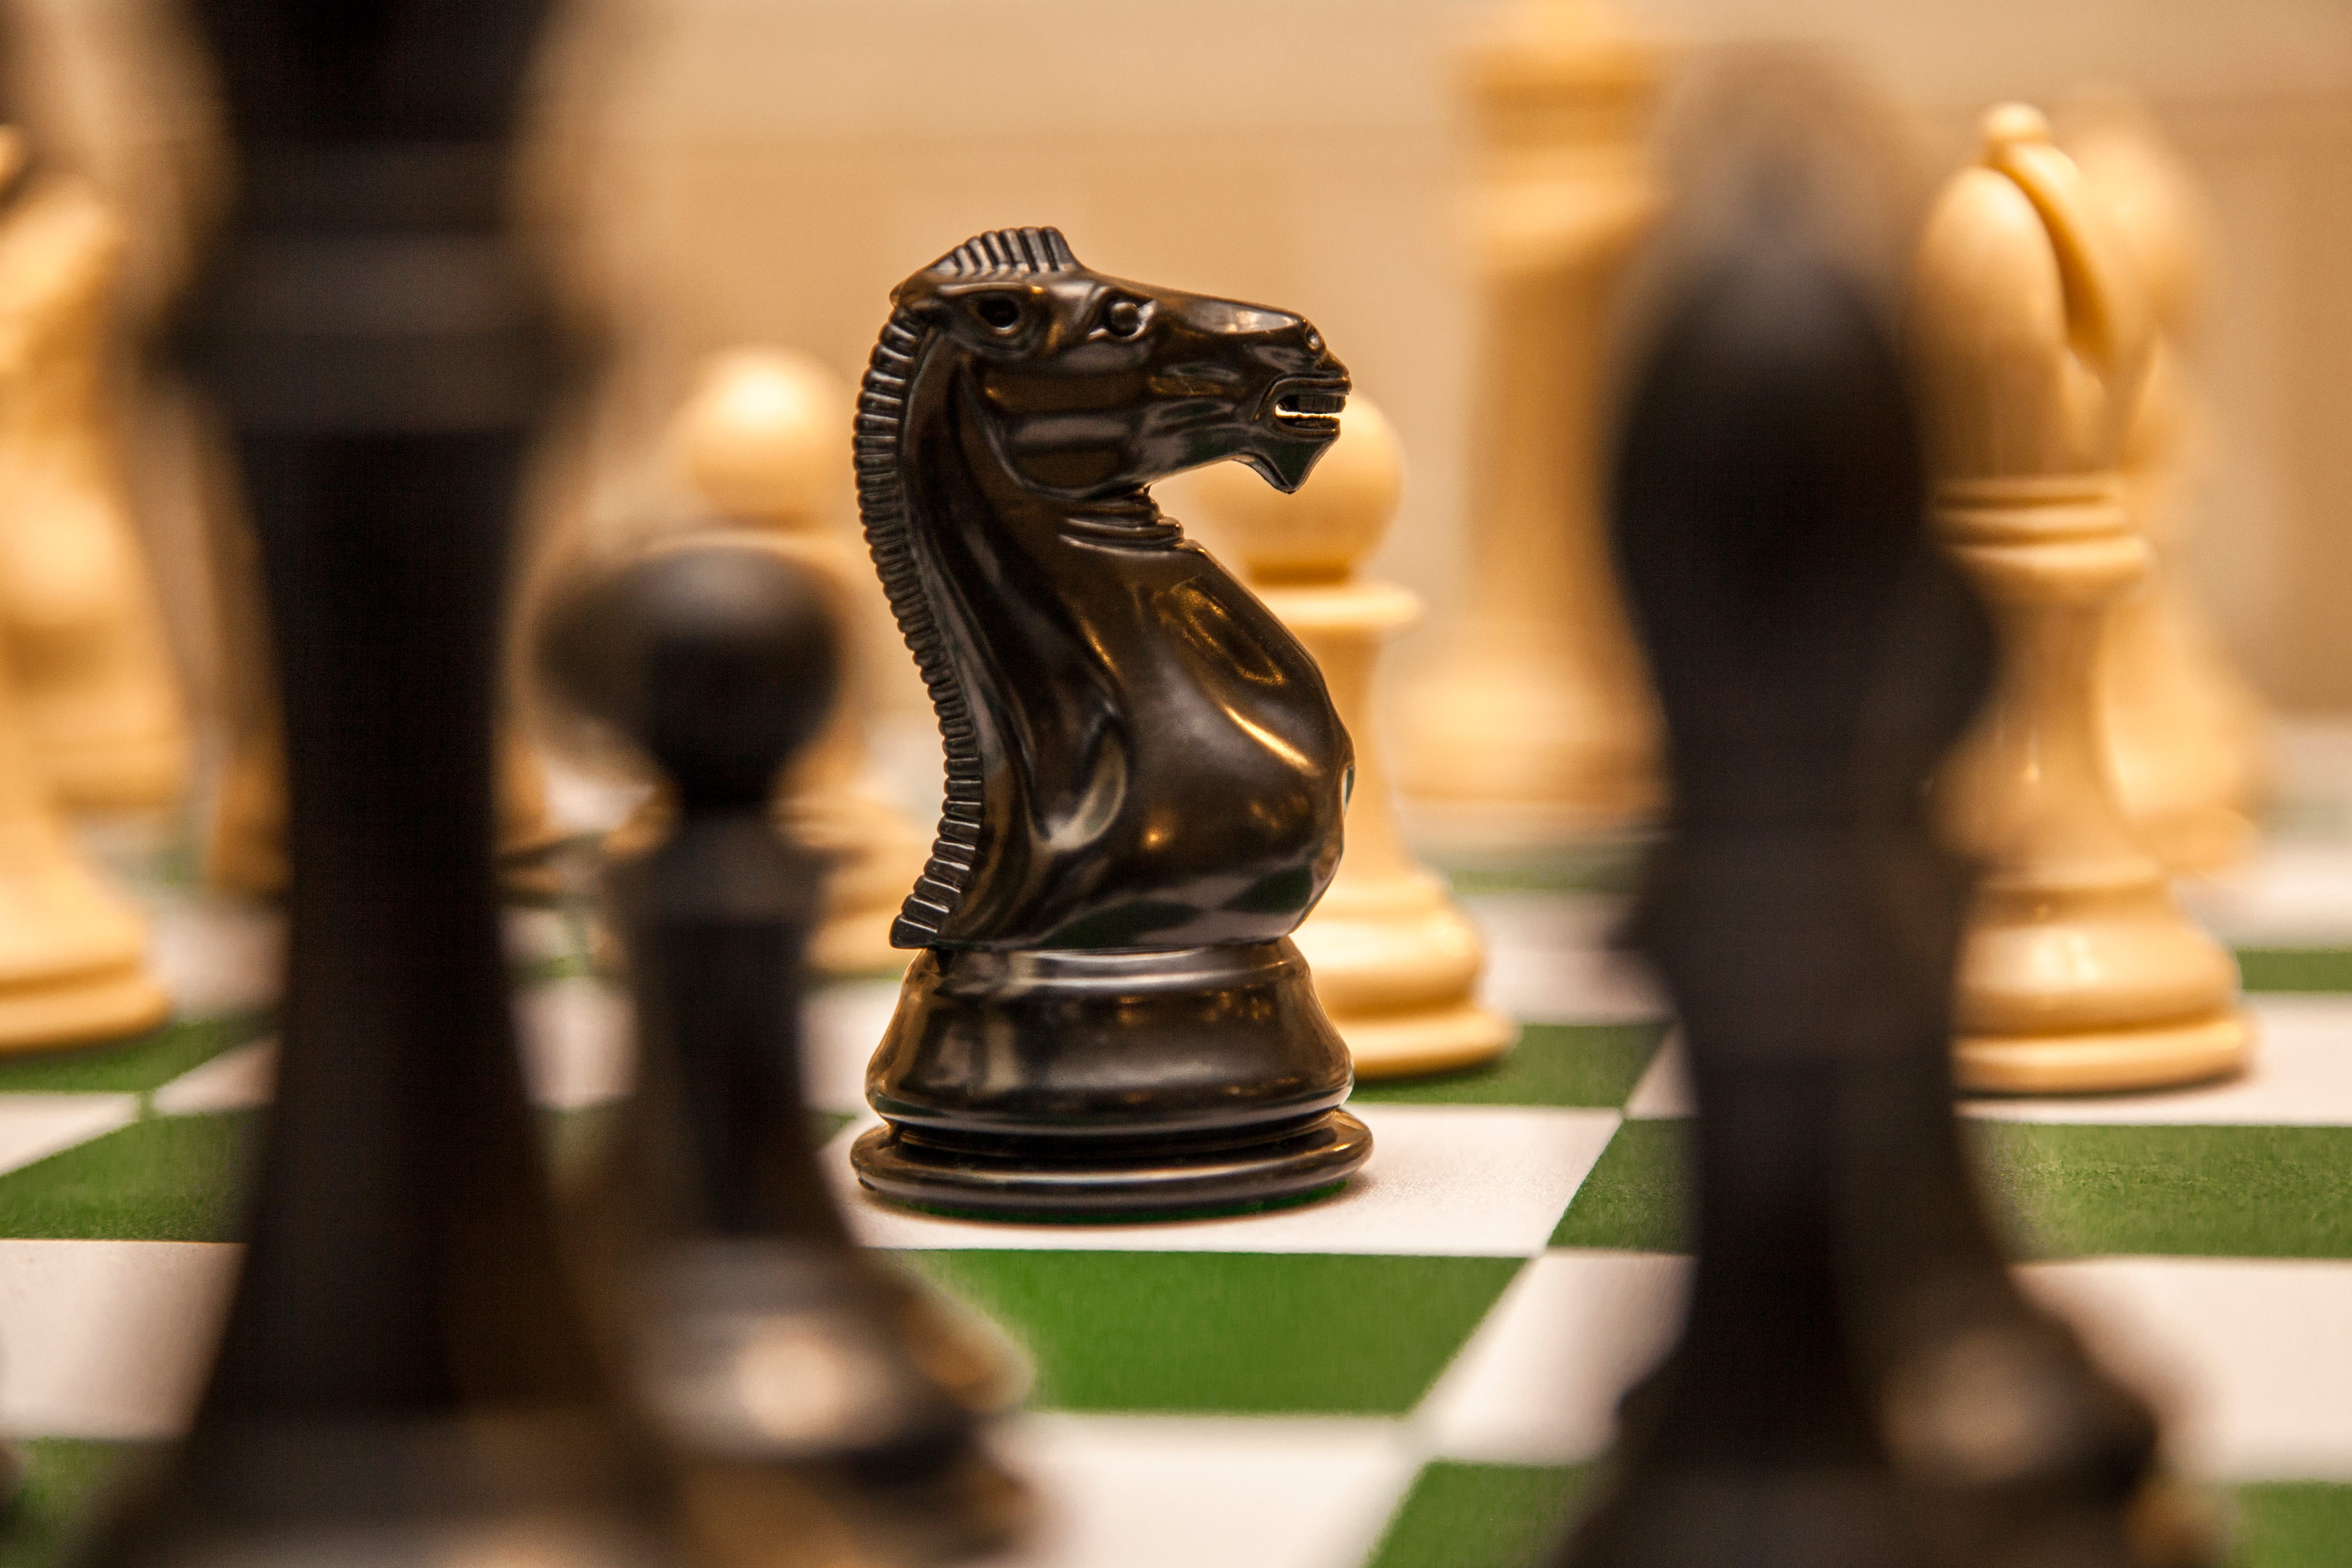 The Strategic Penpals Who Play Chess by Mail - Atlas Obscura